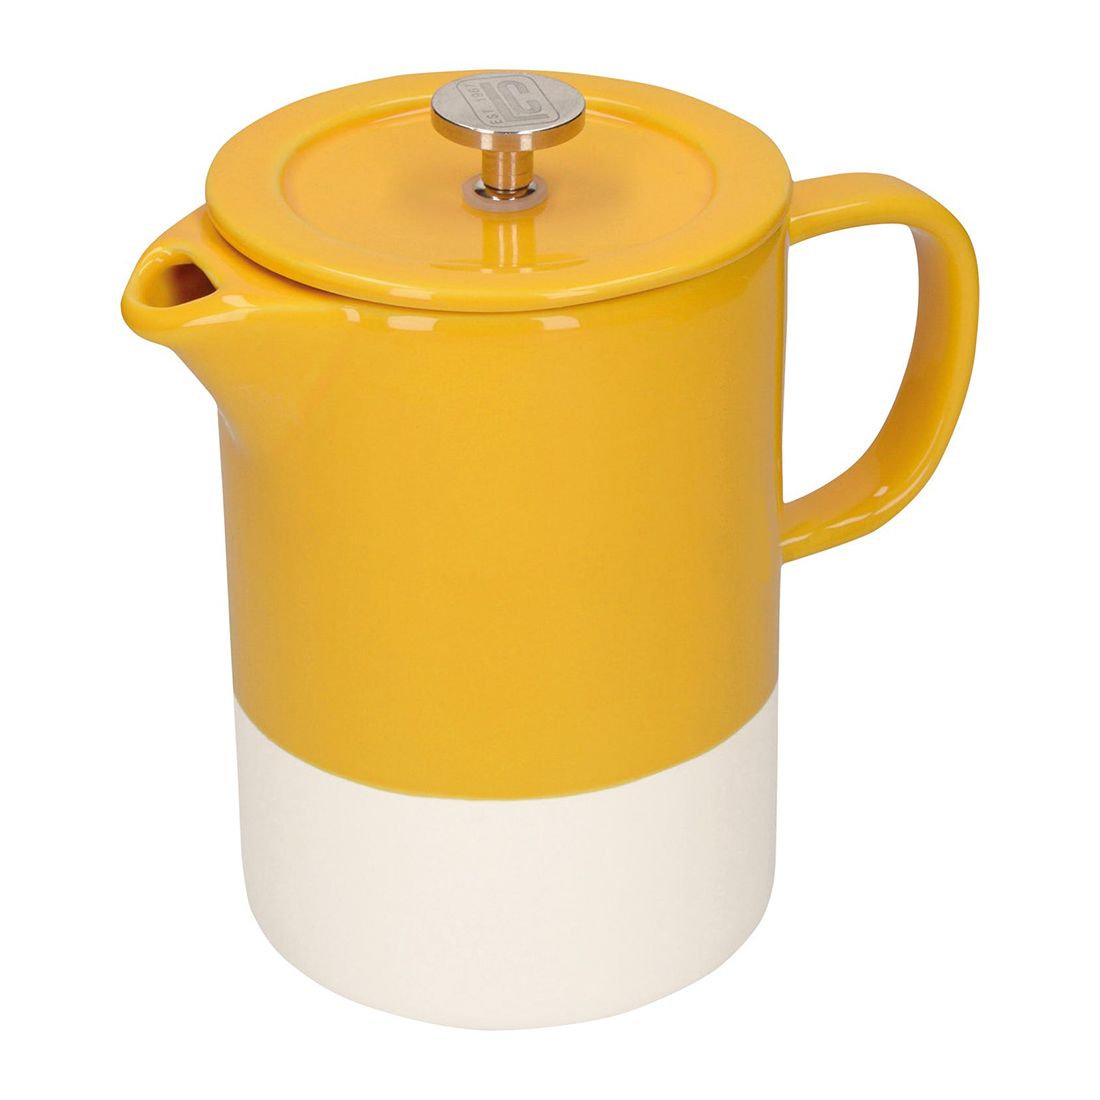 Kitchencraft L.A. Cafetiere Barcelona Mustard 6-Cup 850ml Cafetiere